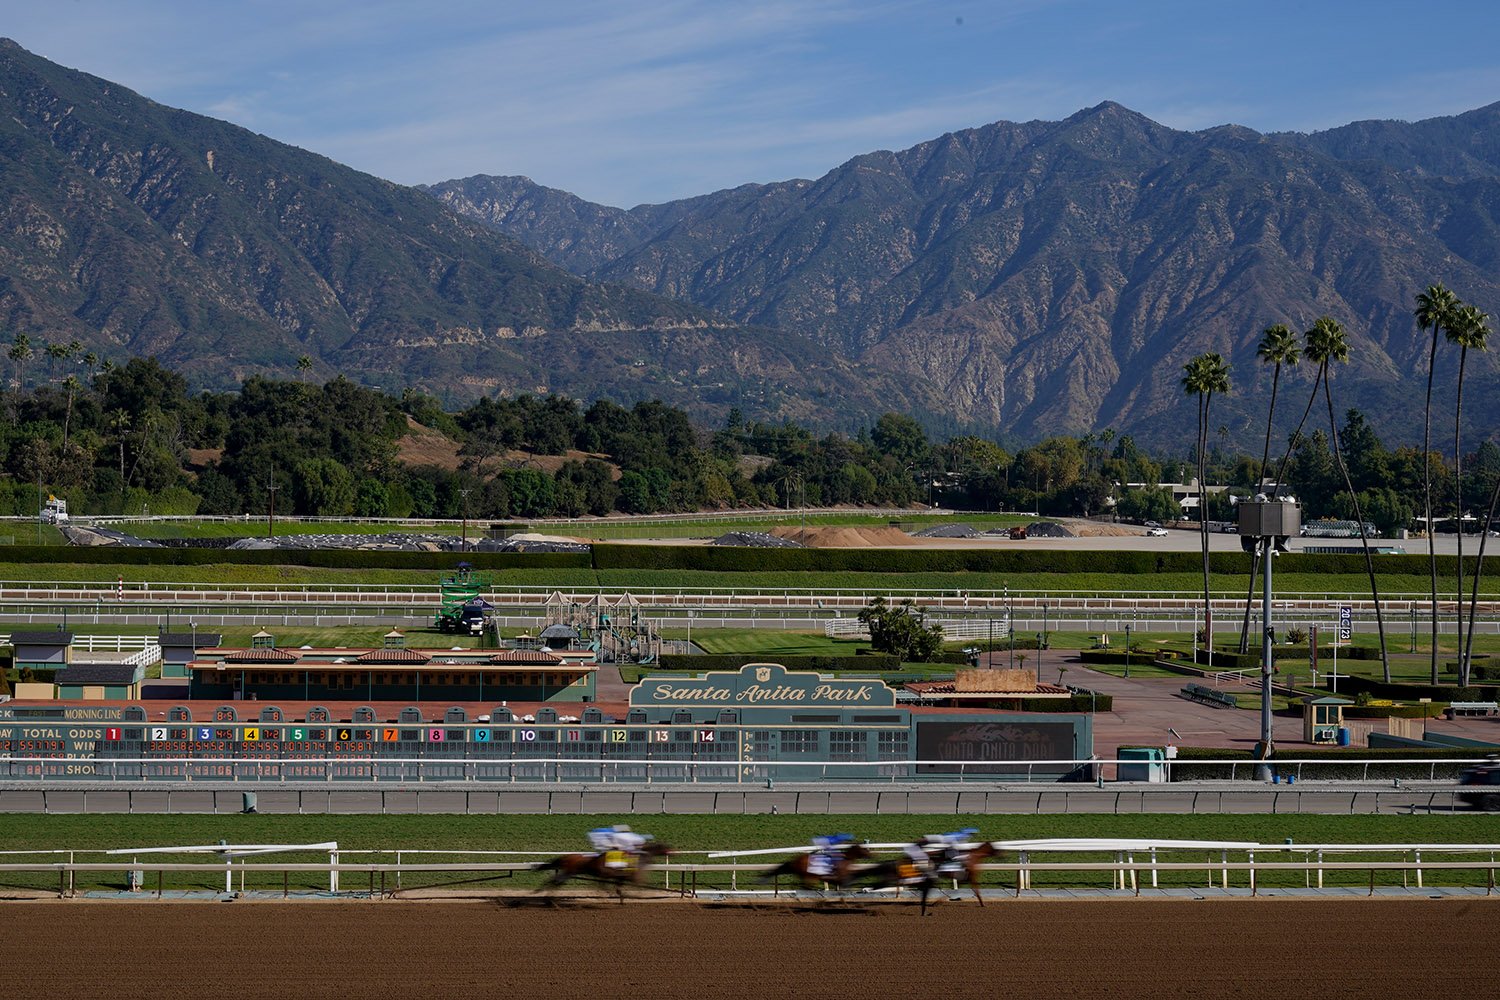  Horses and riders finish the first race during the second day of Breeder's Cup horse races Saturday, Nov. 4, 2023, at Santa Anita Park in Arcadia, Calif. The first race is not a Breeders' Cup Championship race. (AP Photo/Ashley Landis) 